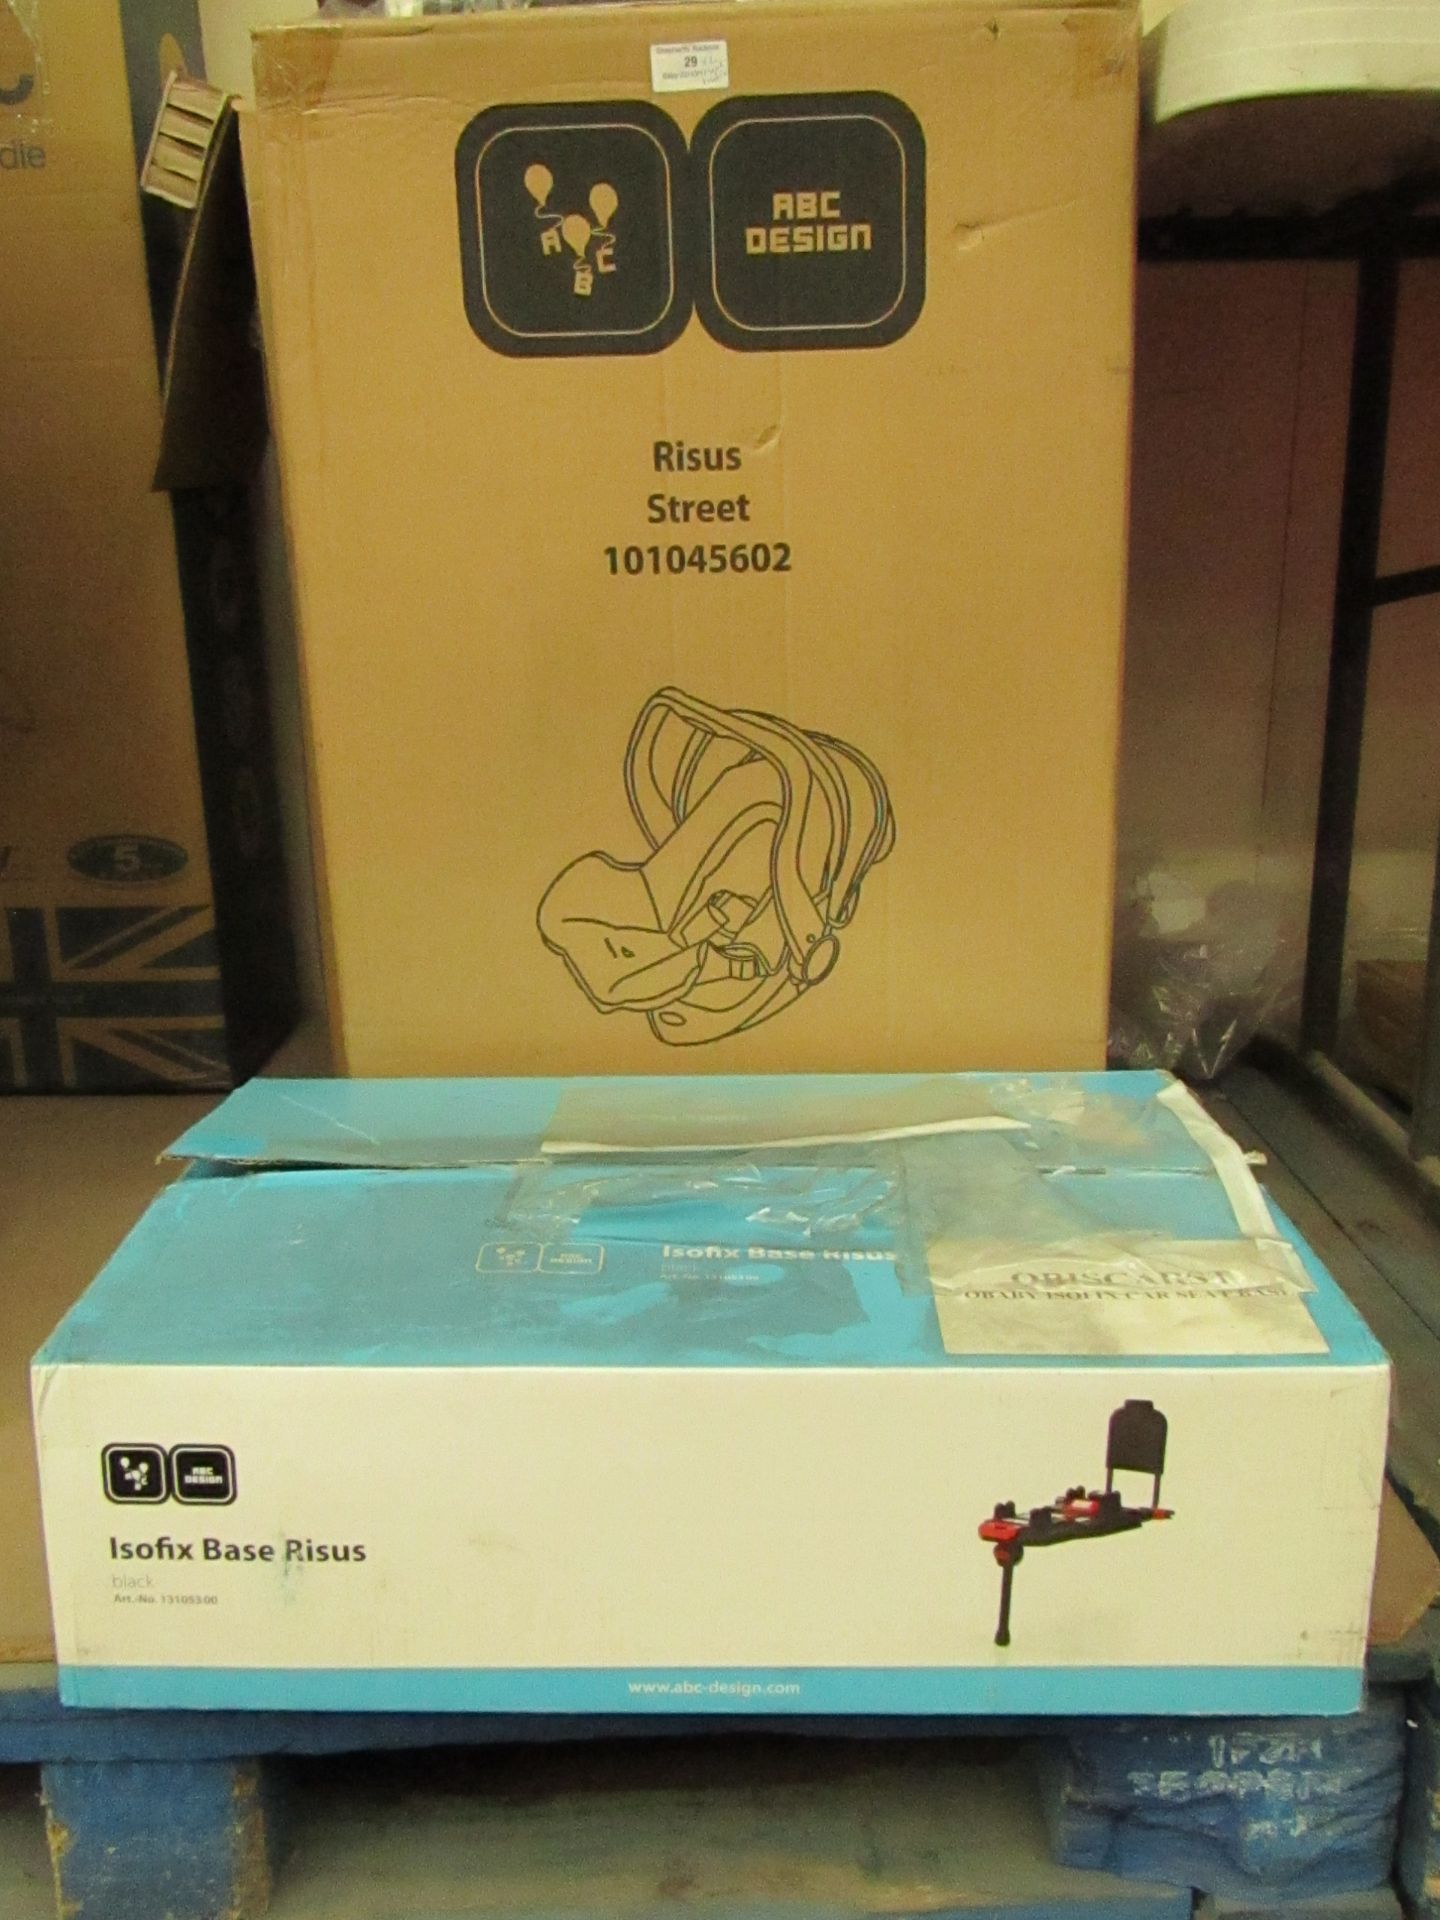 ABC Design Risus Street Car Seat with Isofix Base, Both New and Boxed, Total RRP for Both is £240